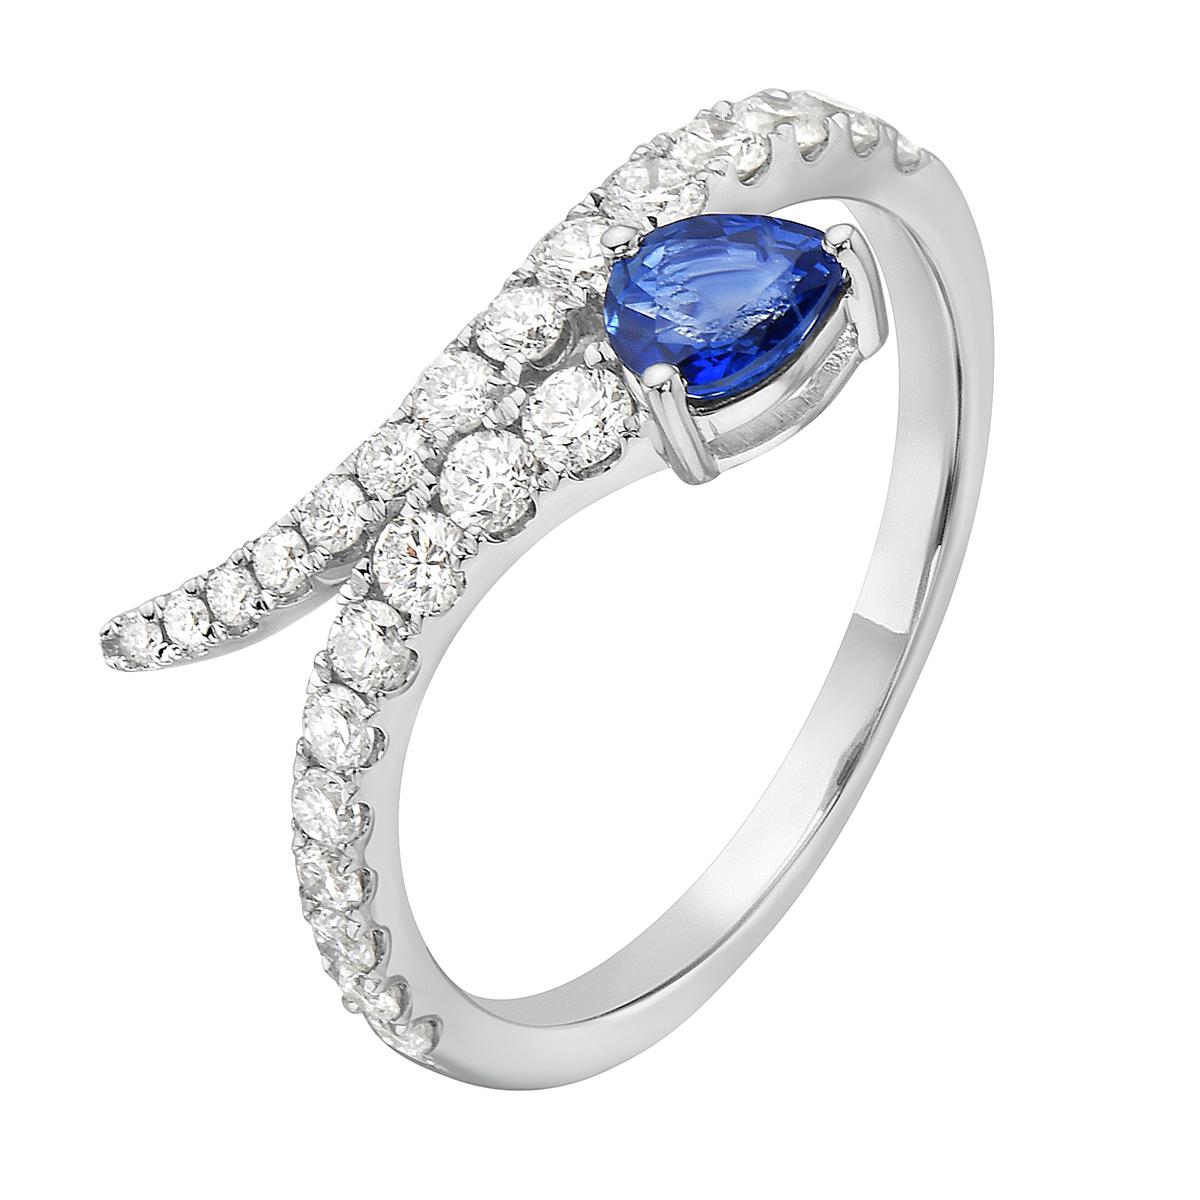 With this exquisite sapphire and diamond ring, style and glamour are in the spotlight. This ring is set in 14-karat gold, made out of 2.2 grams of gold. The color of the diamonds is SI. The clarity is VS2-SI1. It is made out of 24 diamonds totaling